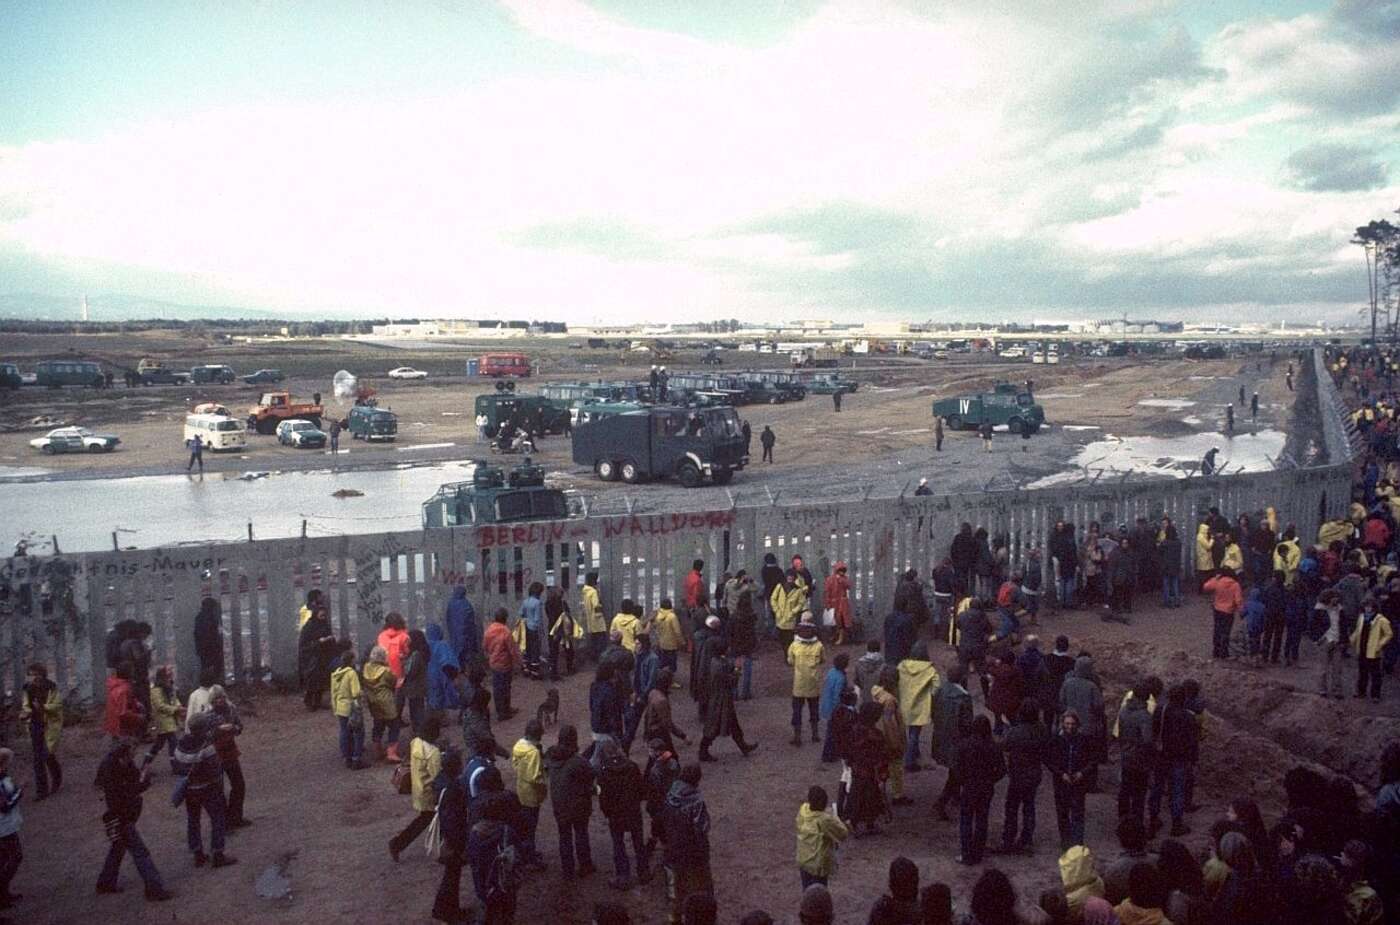 Concrete fence in front of the west runway of the Frankfurt airport under construction, between 1980 and 1984